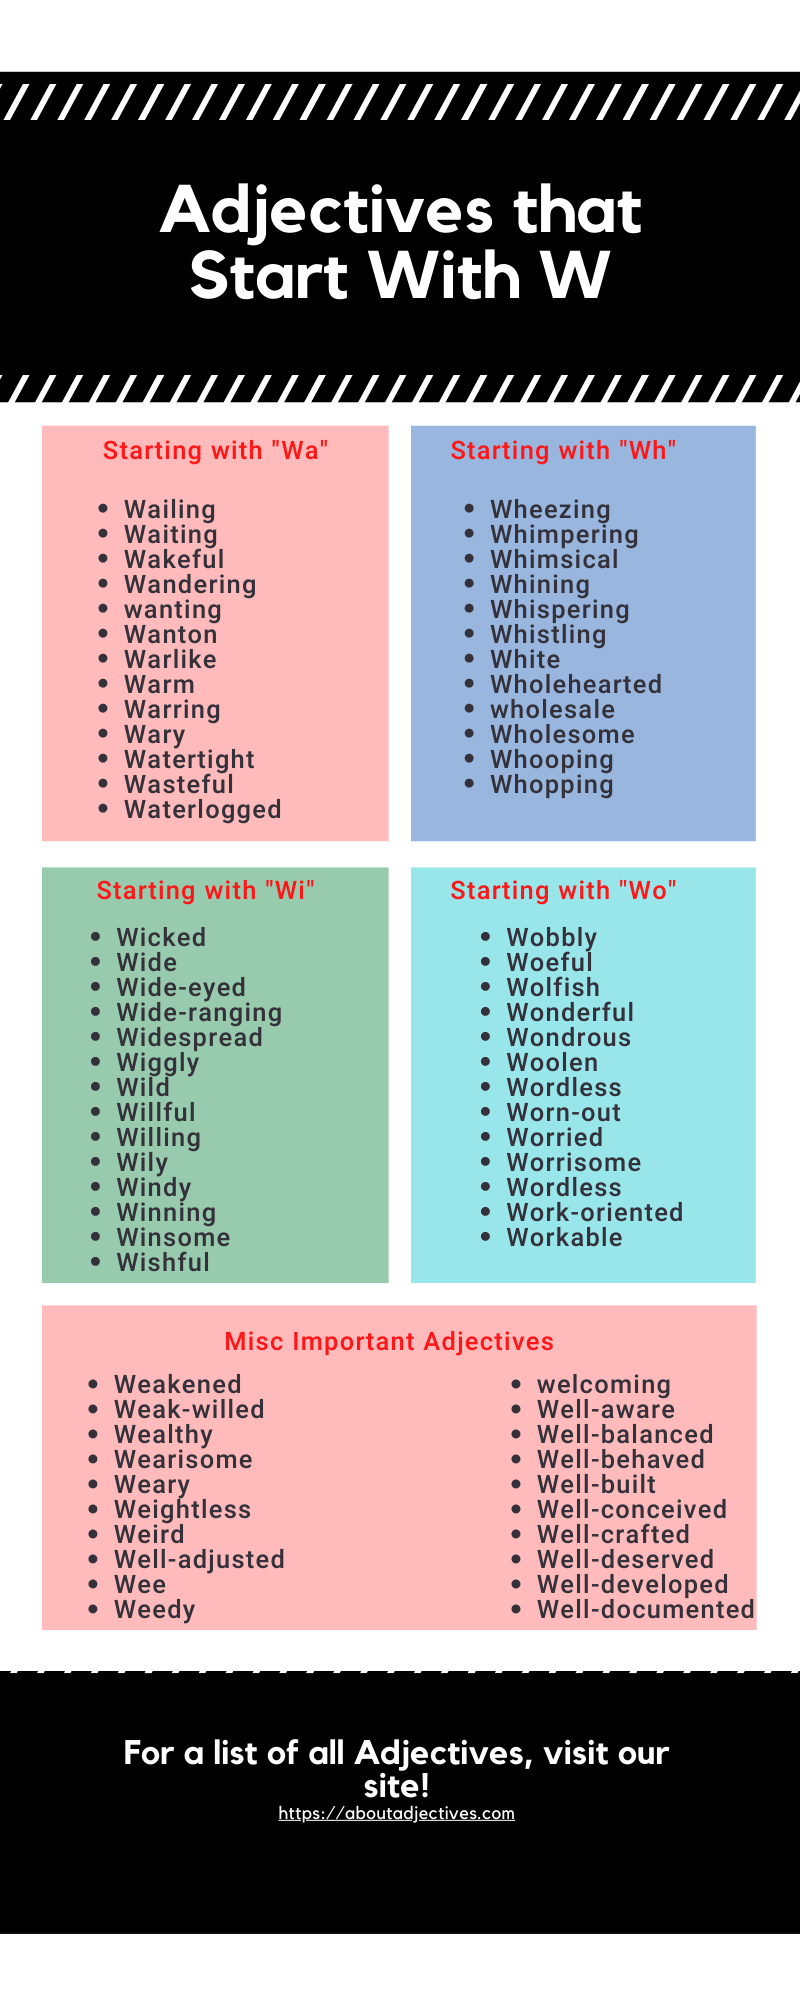 Adjectives that Start with W